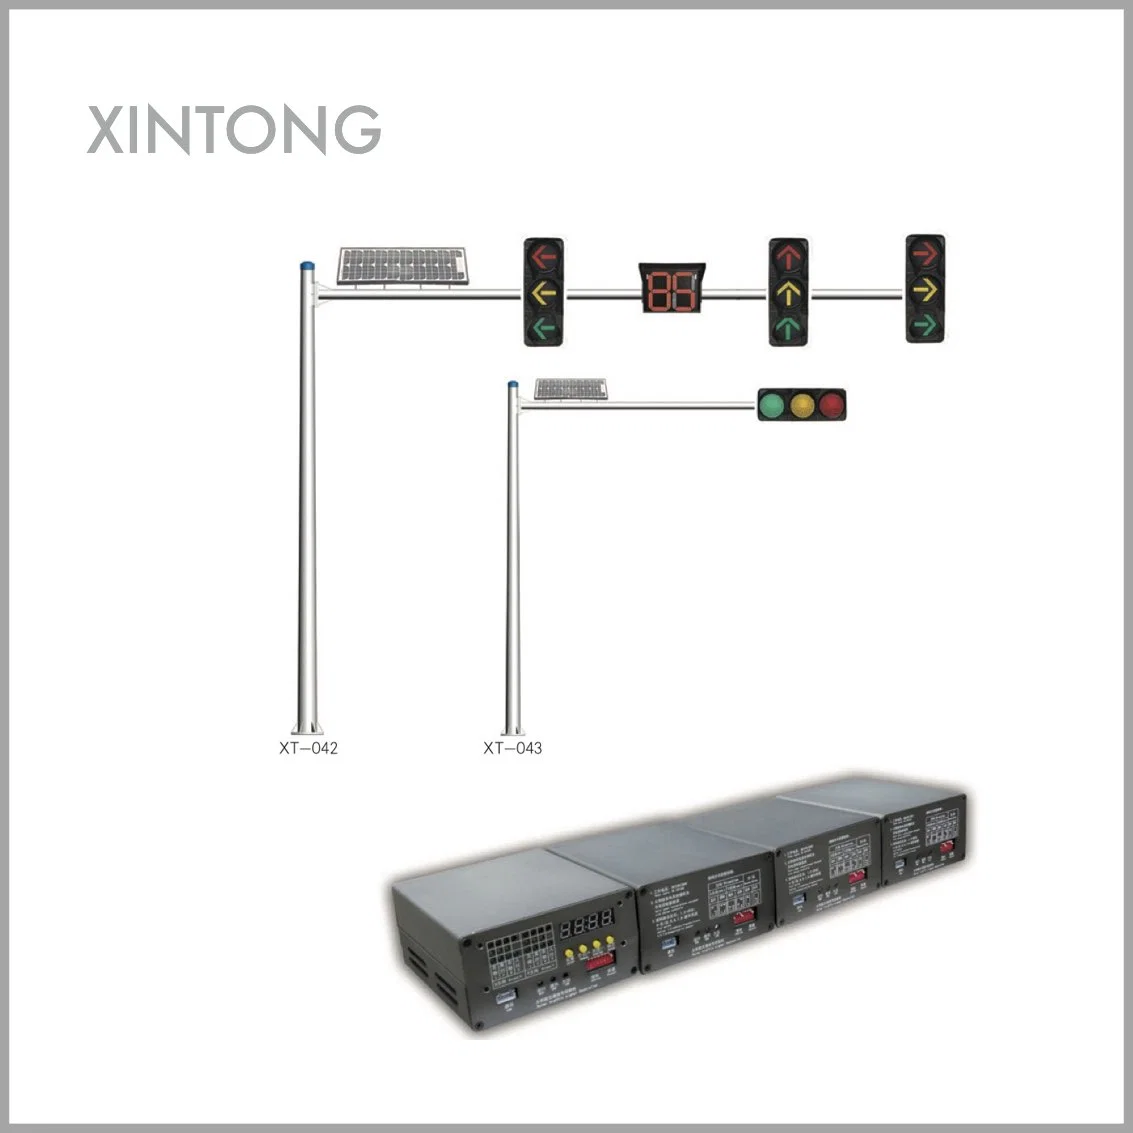 Xintong 200/300/400mm Intelligent LED Traffic Signal Light with Countdown Timer for Vehicle